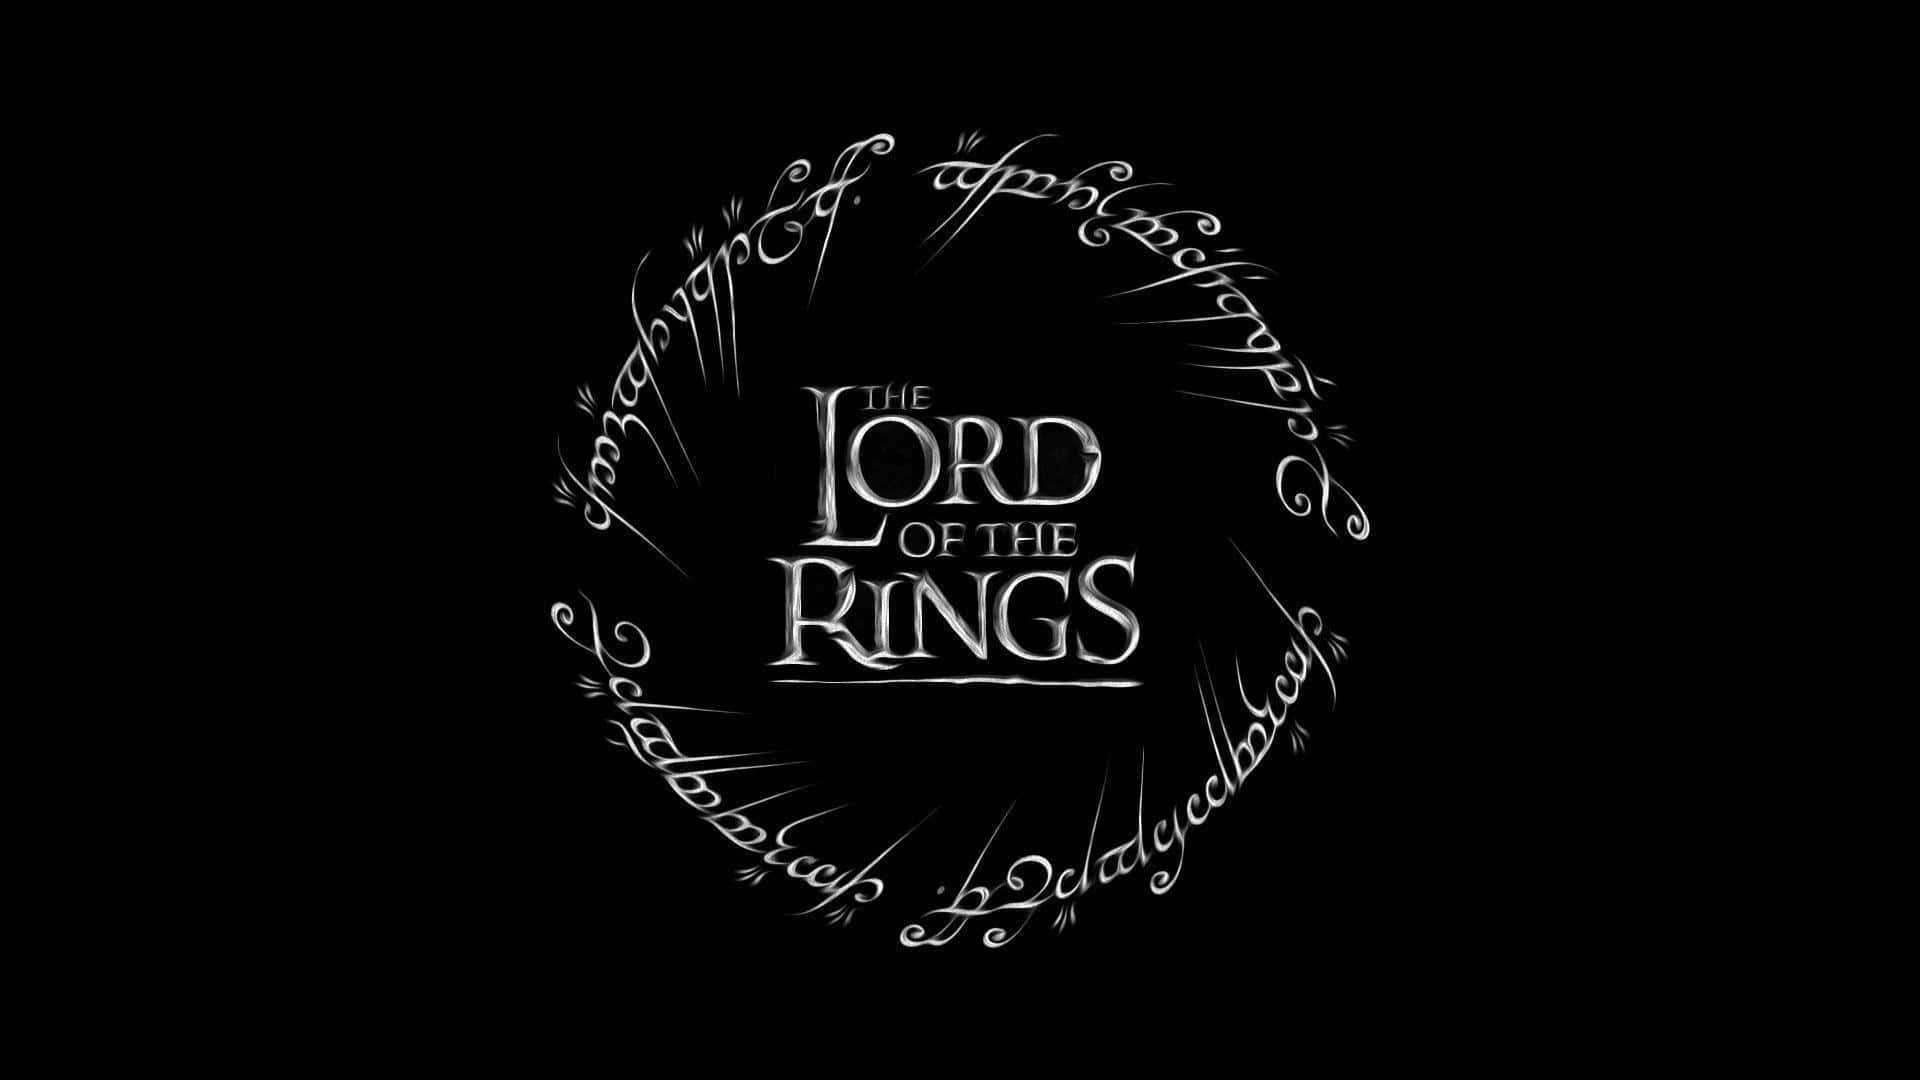 Representing the strength, courage and memorable adventure of Lord of The Rings.